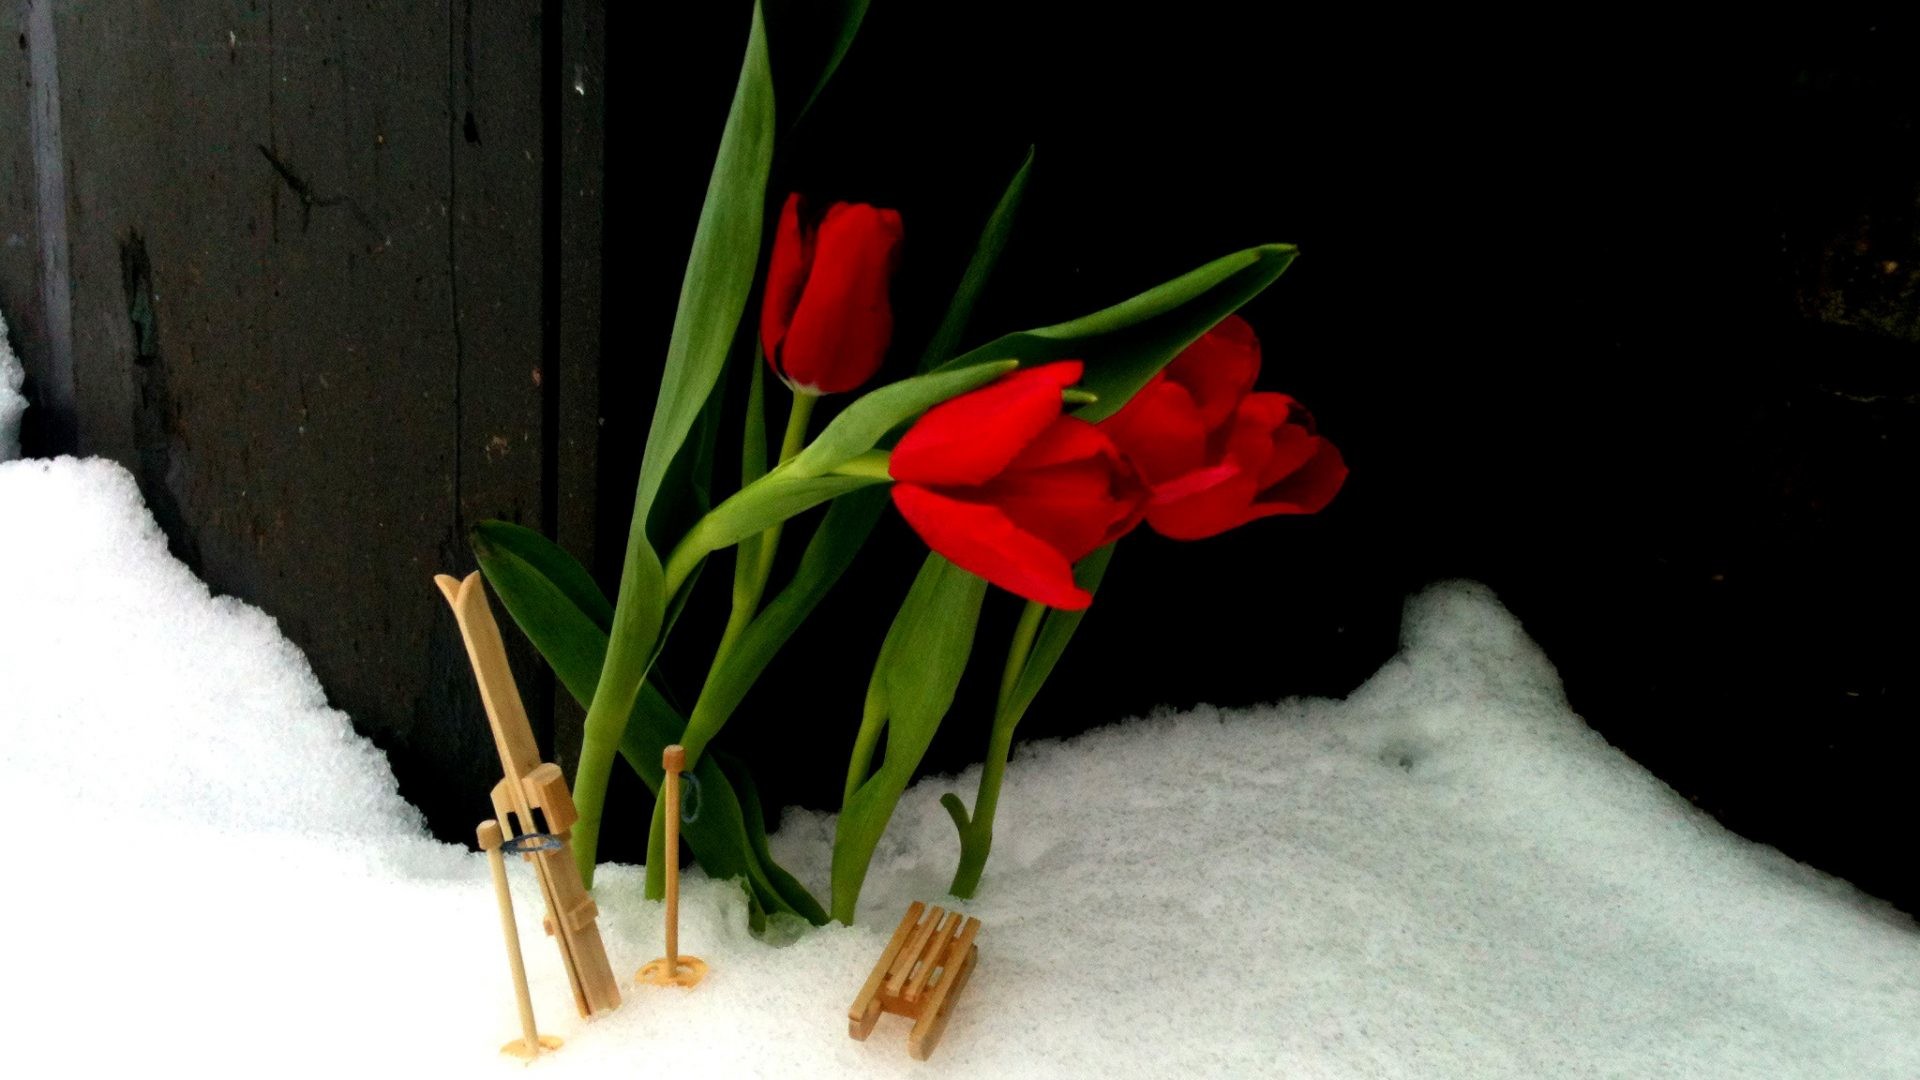 1920x1080 Sled Tag - Forever Let Skis Graceful Sled Nature Winter Fresh Snow Tulips  White Flowers Mini